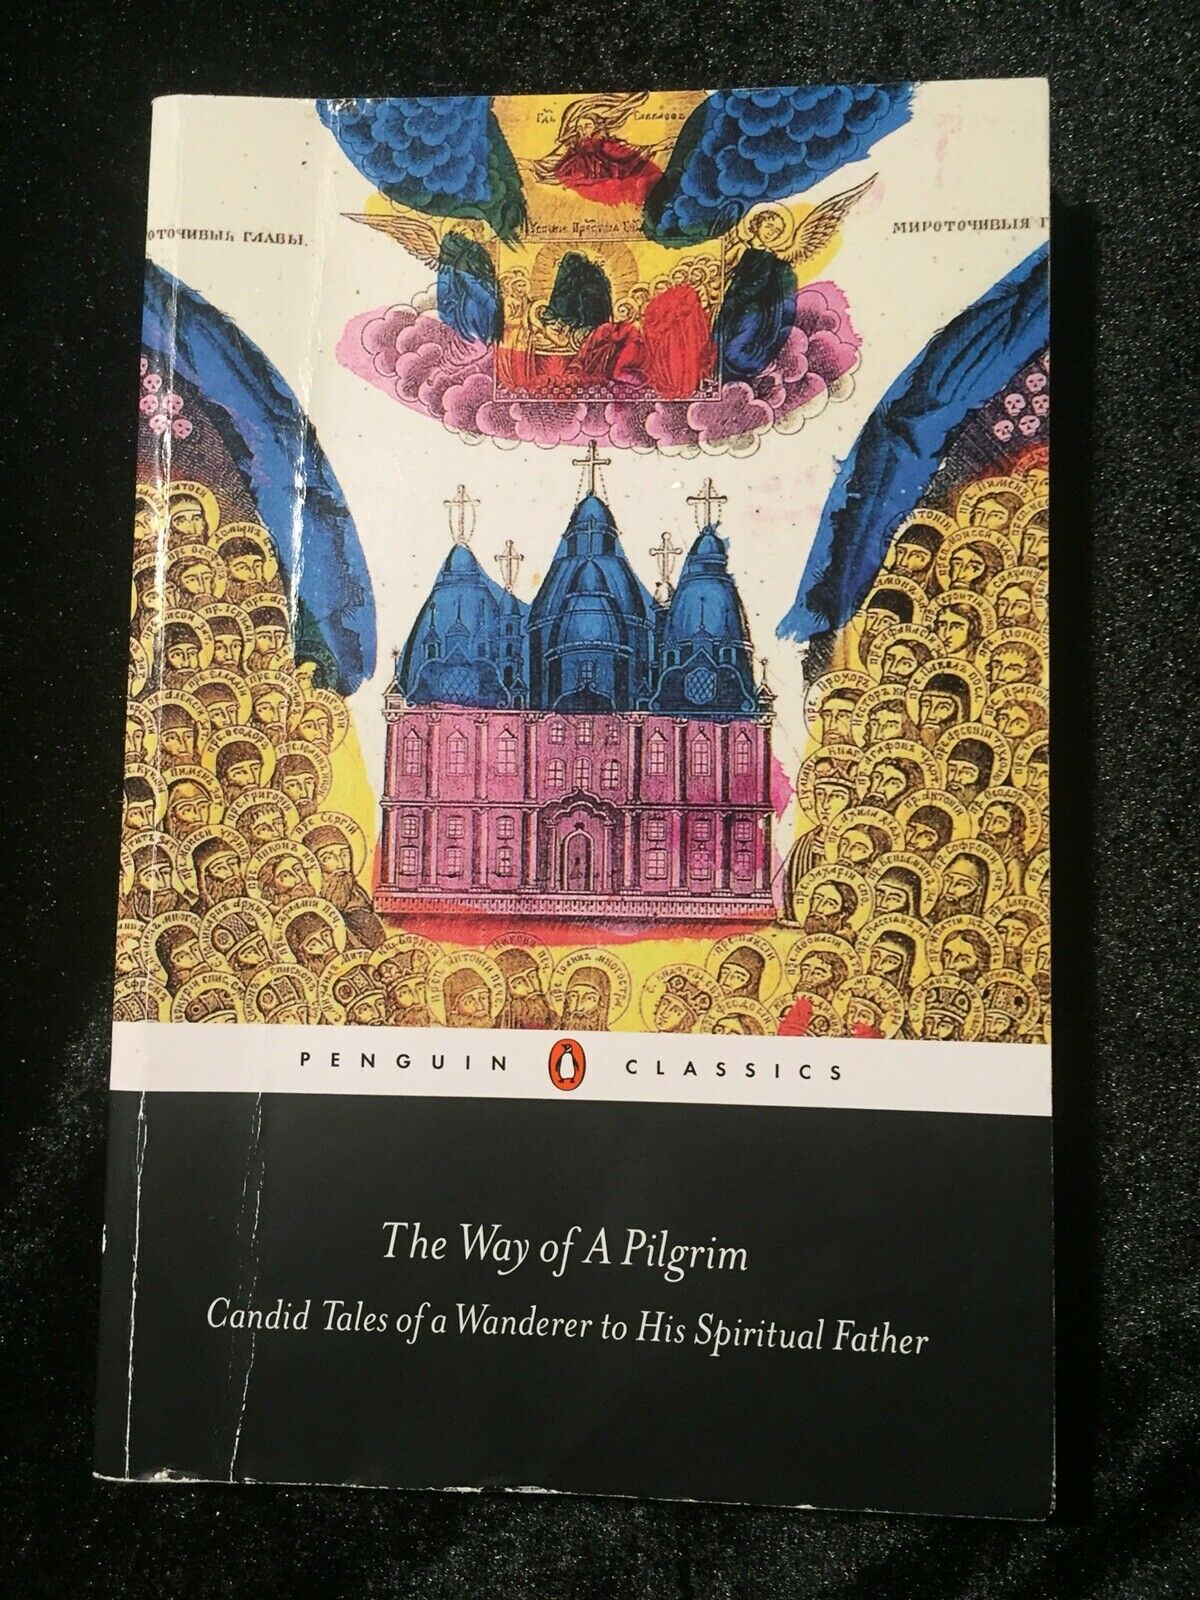 The Way of a Pilgrim: Candid Tales of a Wanderer to His Spiritual Father  (Penguin Classics)